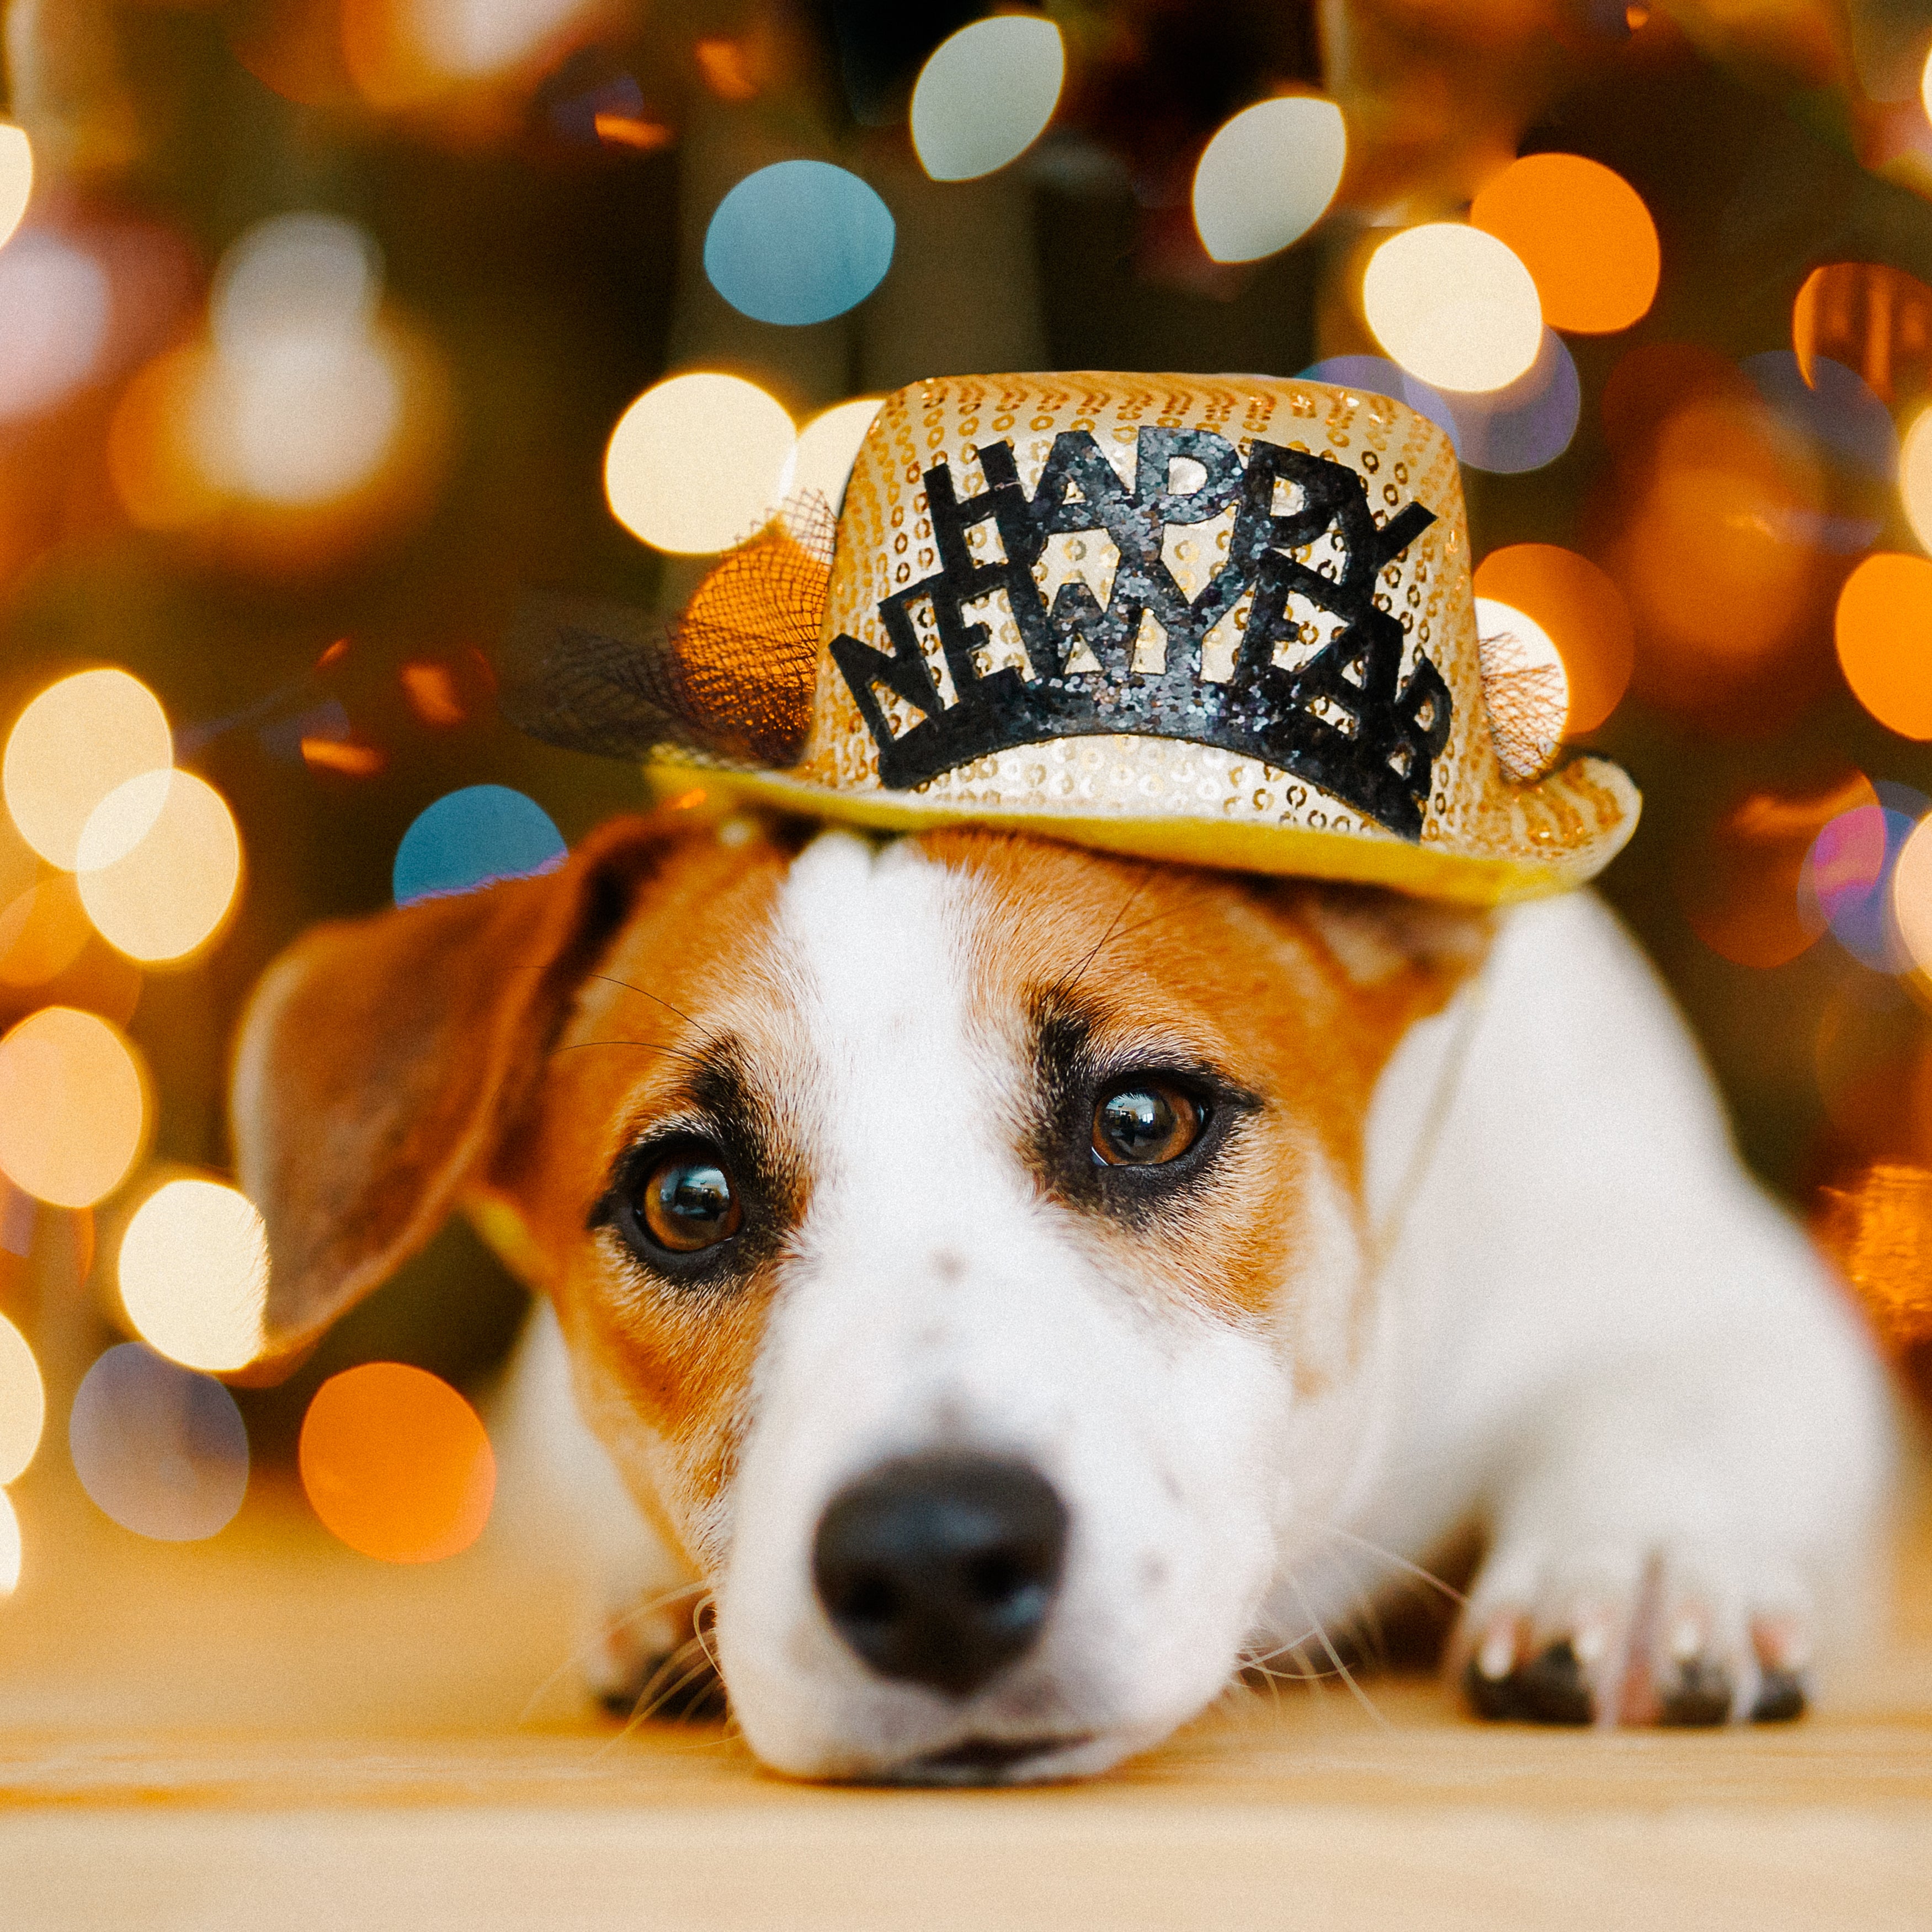 How to Prep Your Pup for New Year's Eve